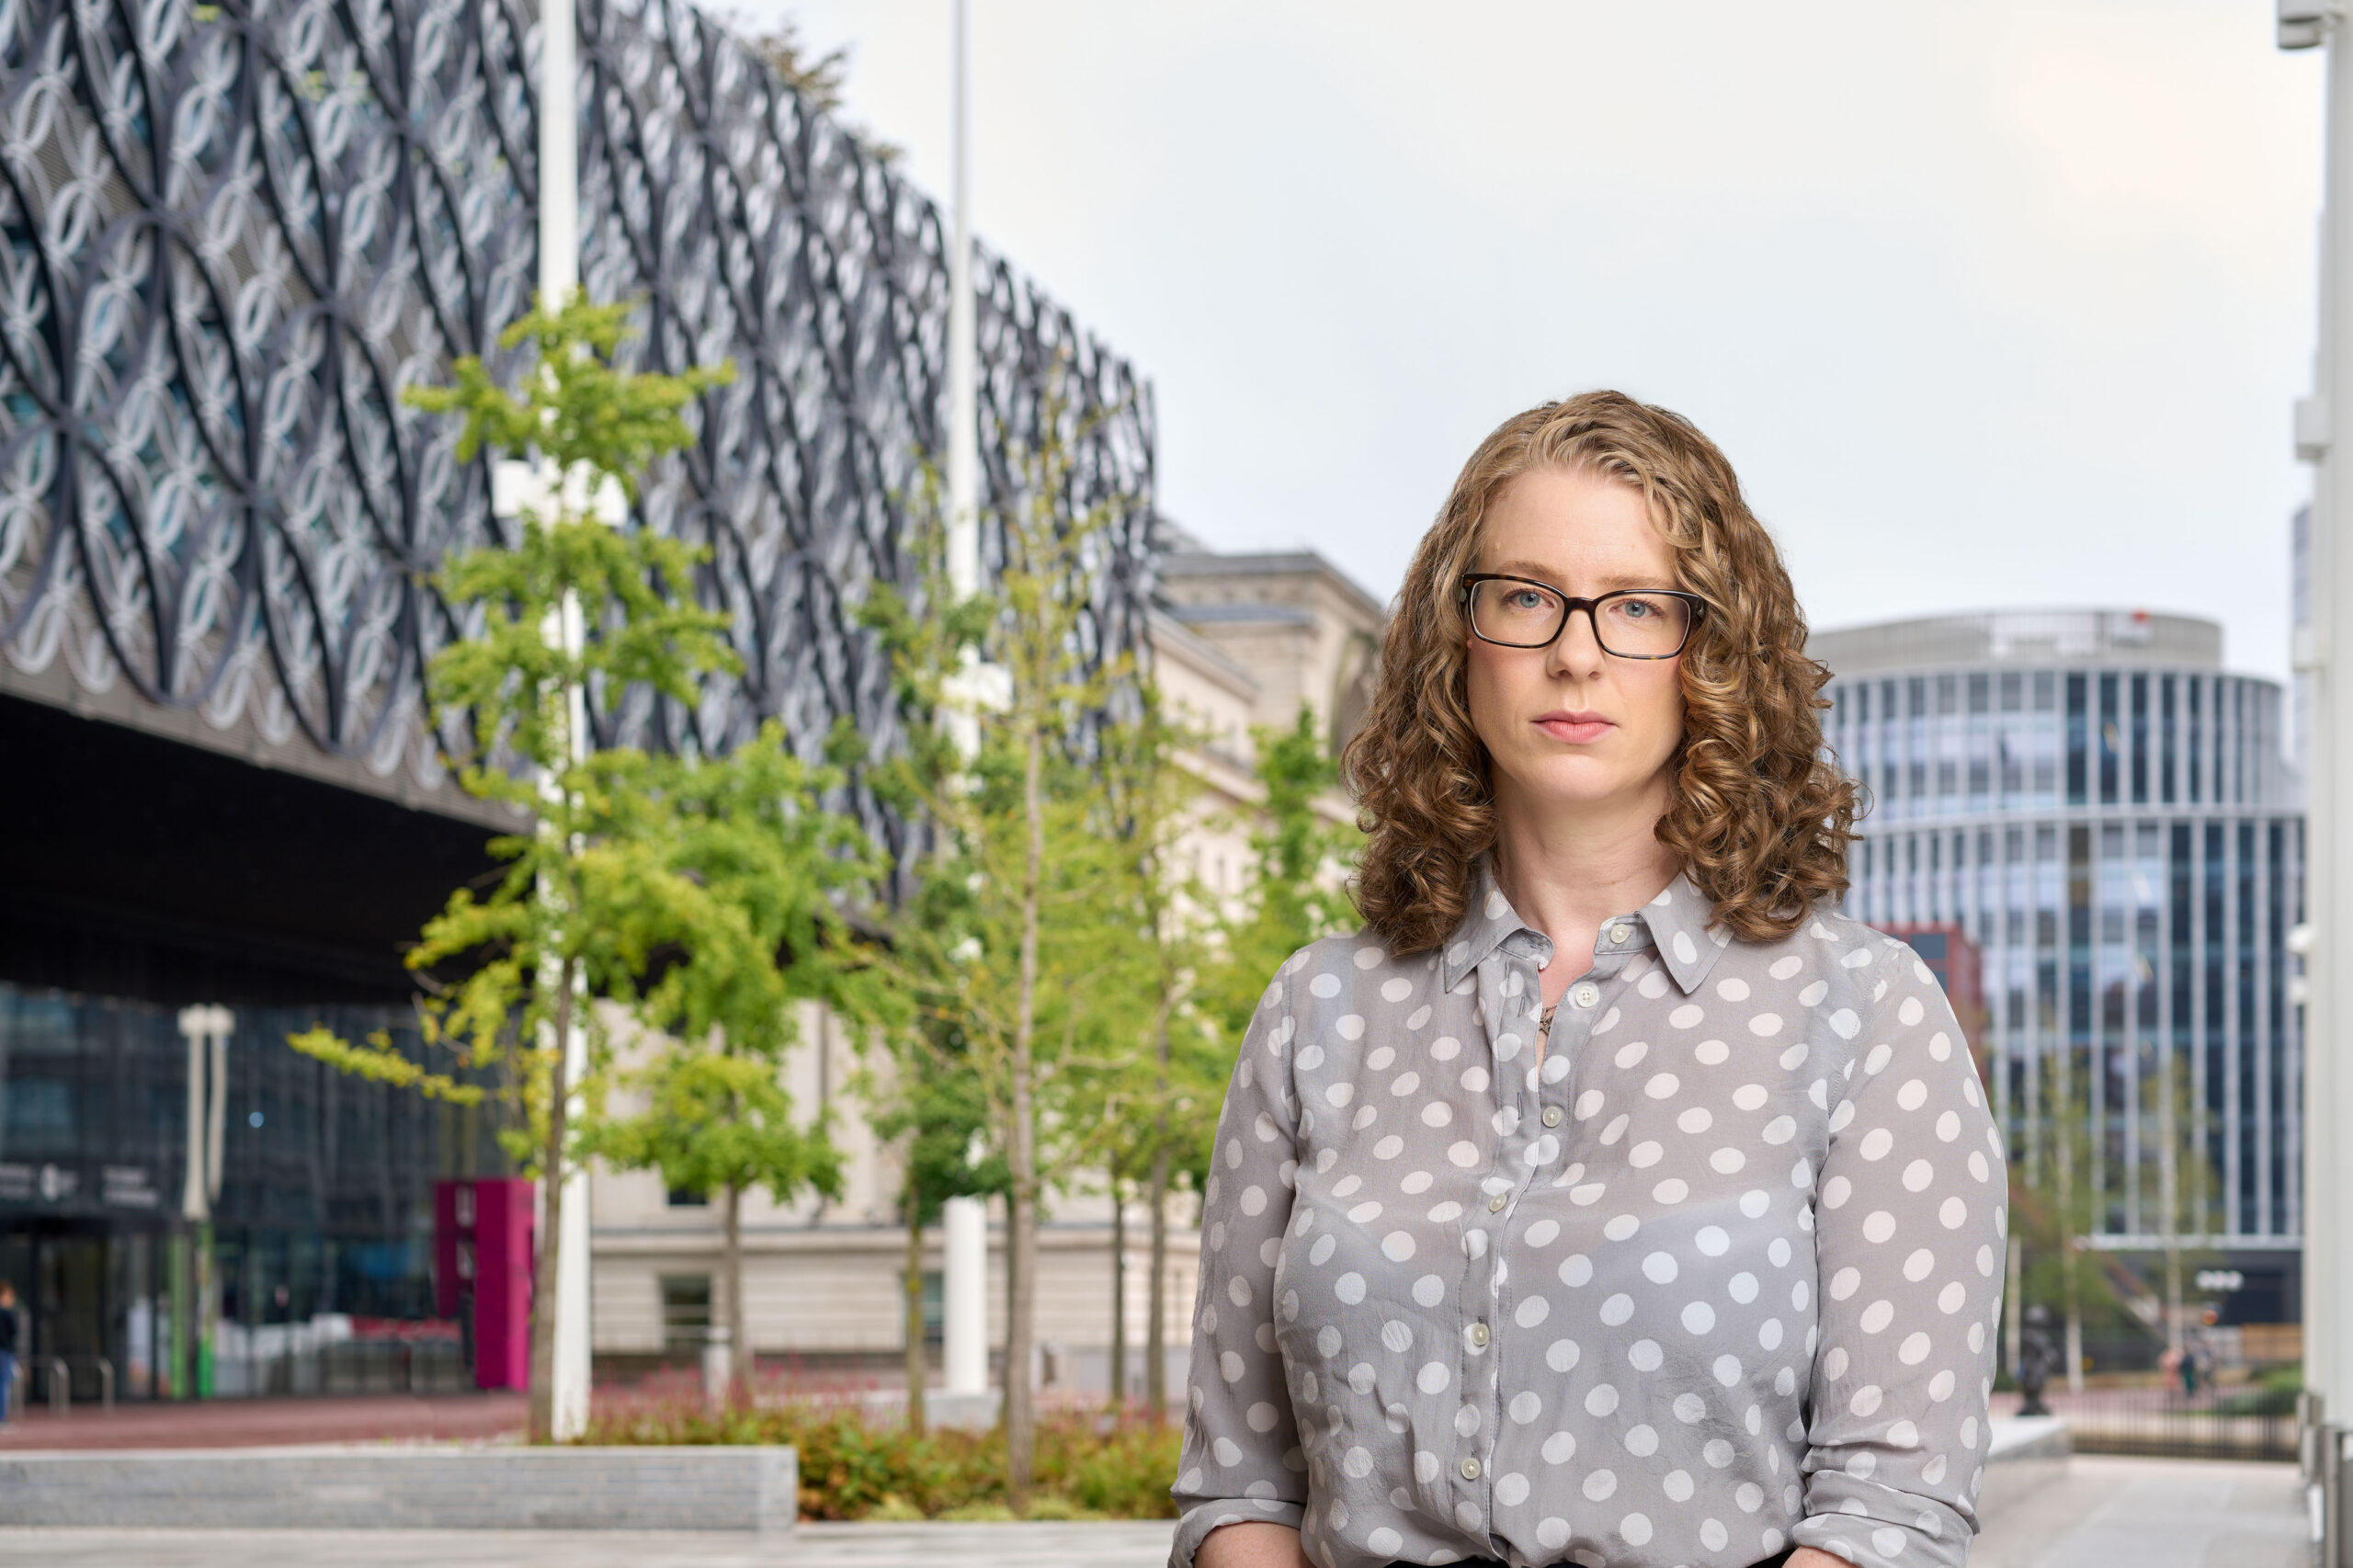 A woman in a light grey shirt with white polka dots in front of some trees and buildings in central Birmingham.